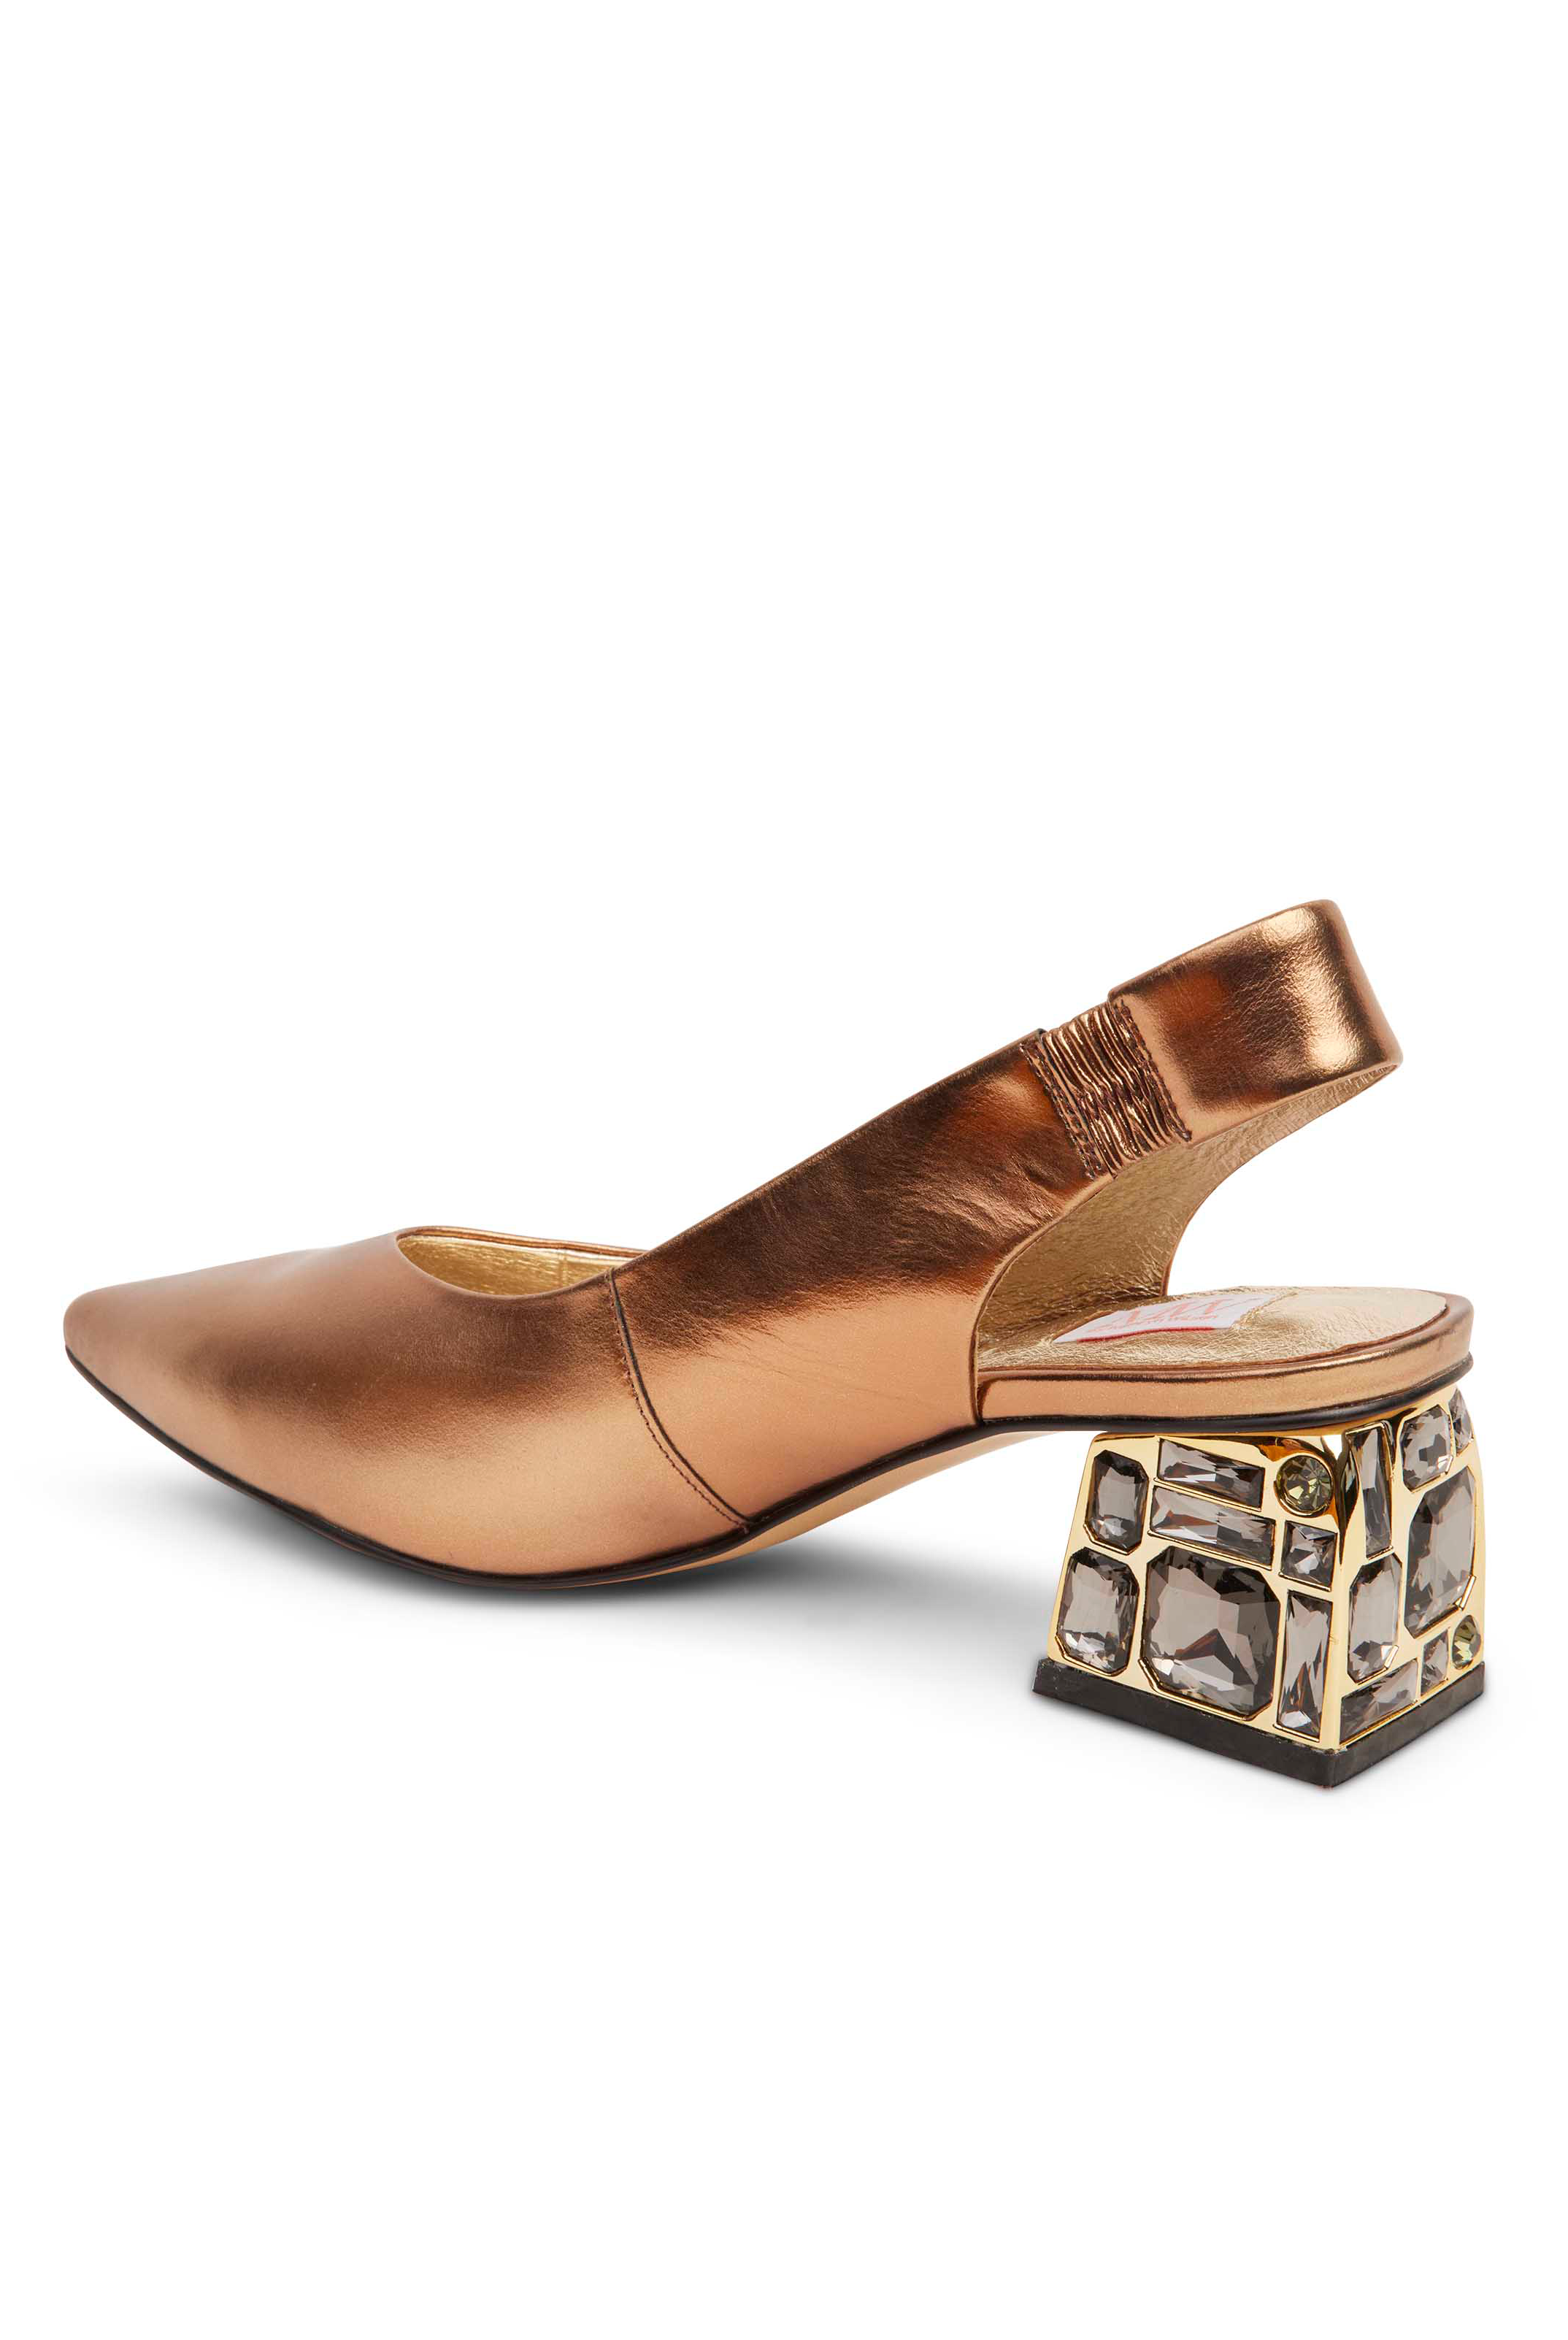 KATHRYN WILSON Jade Slingback - Bronze Calf with Jewels - Kathryn Wilson - [product type] - Magpie Style